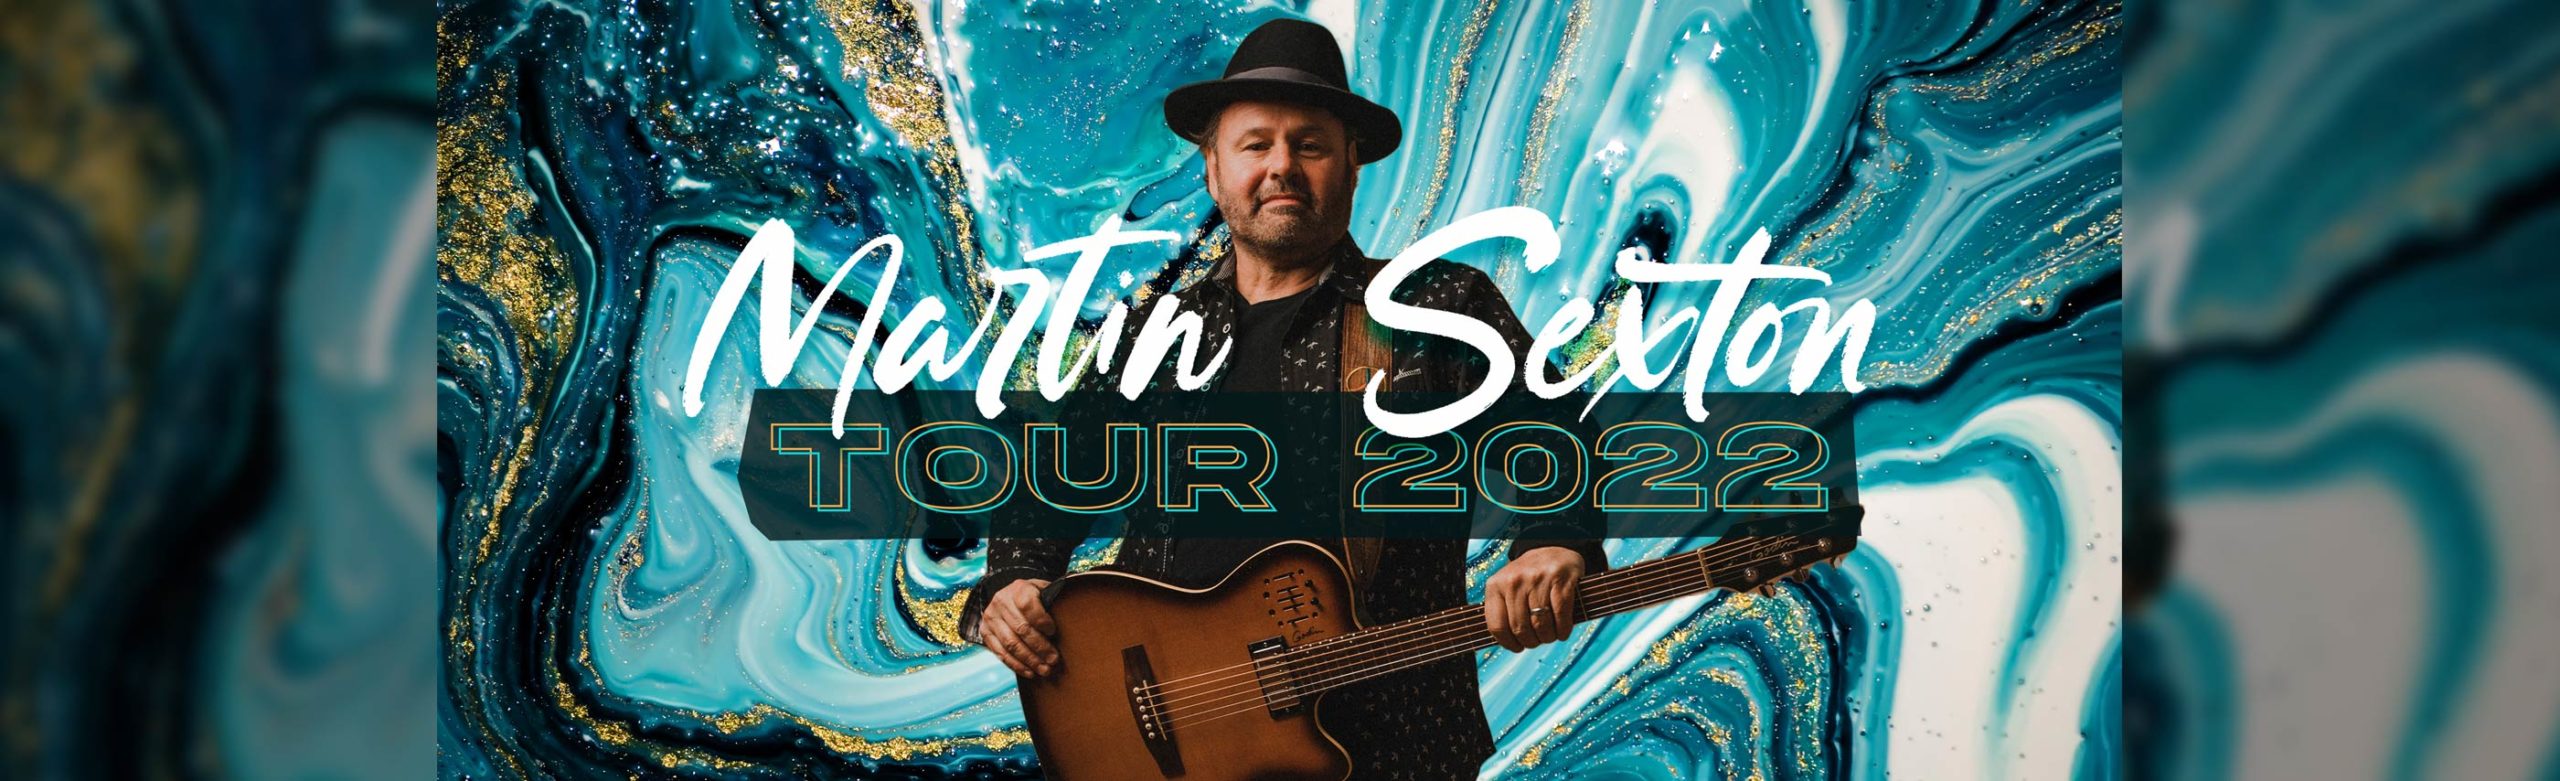 Martin Sexton Tickets Giveaway 2022 Image